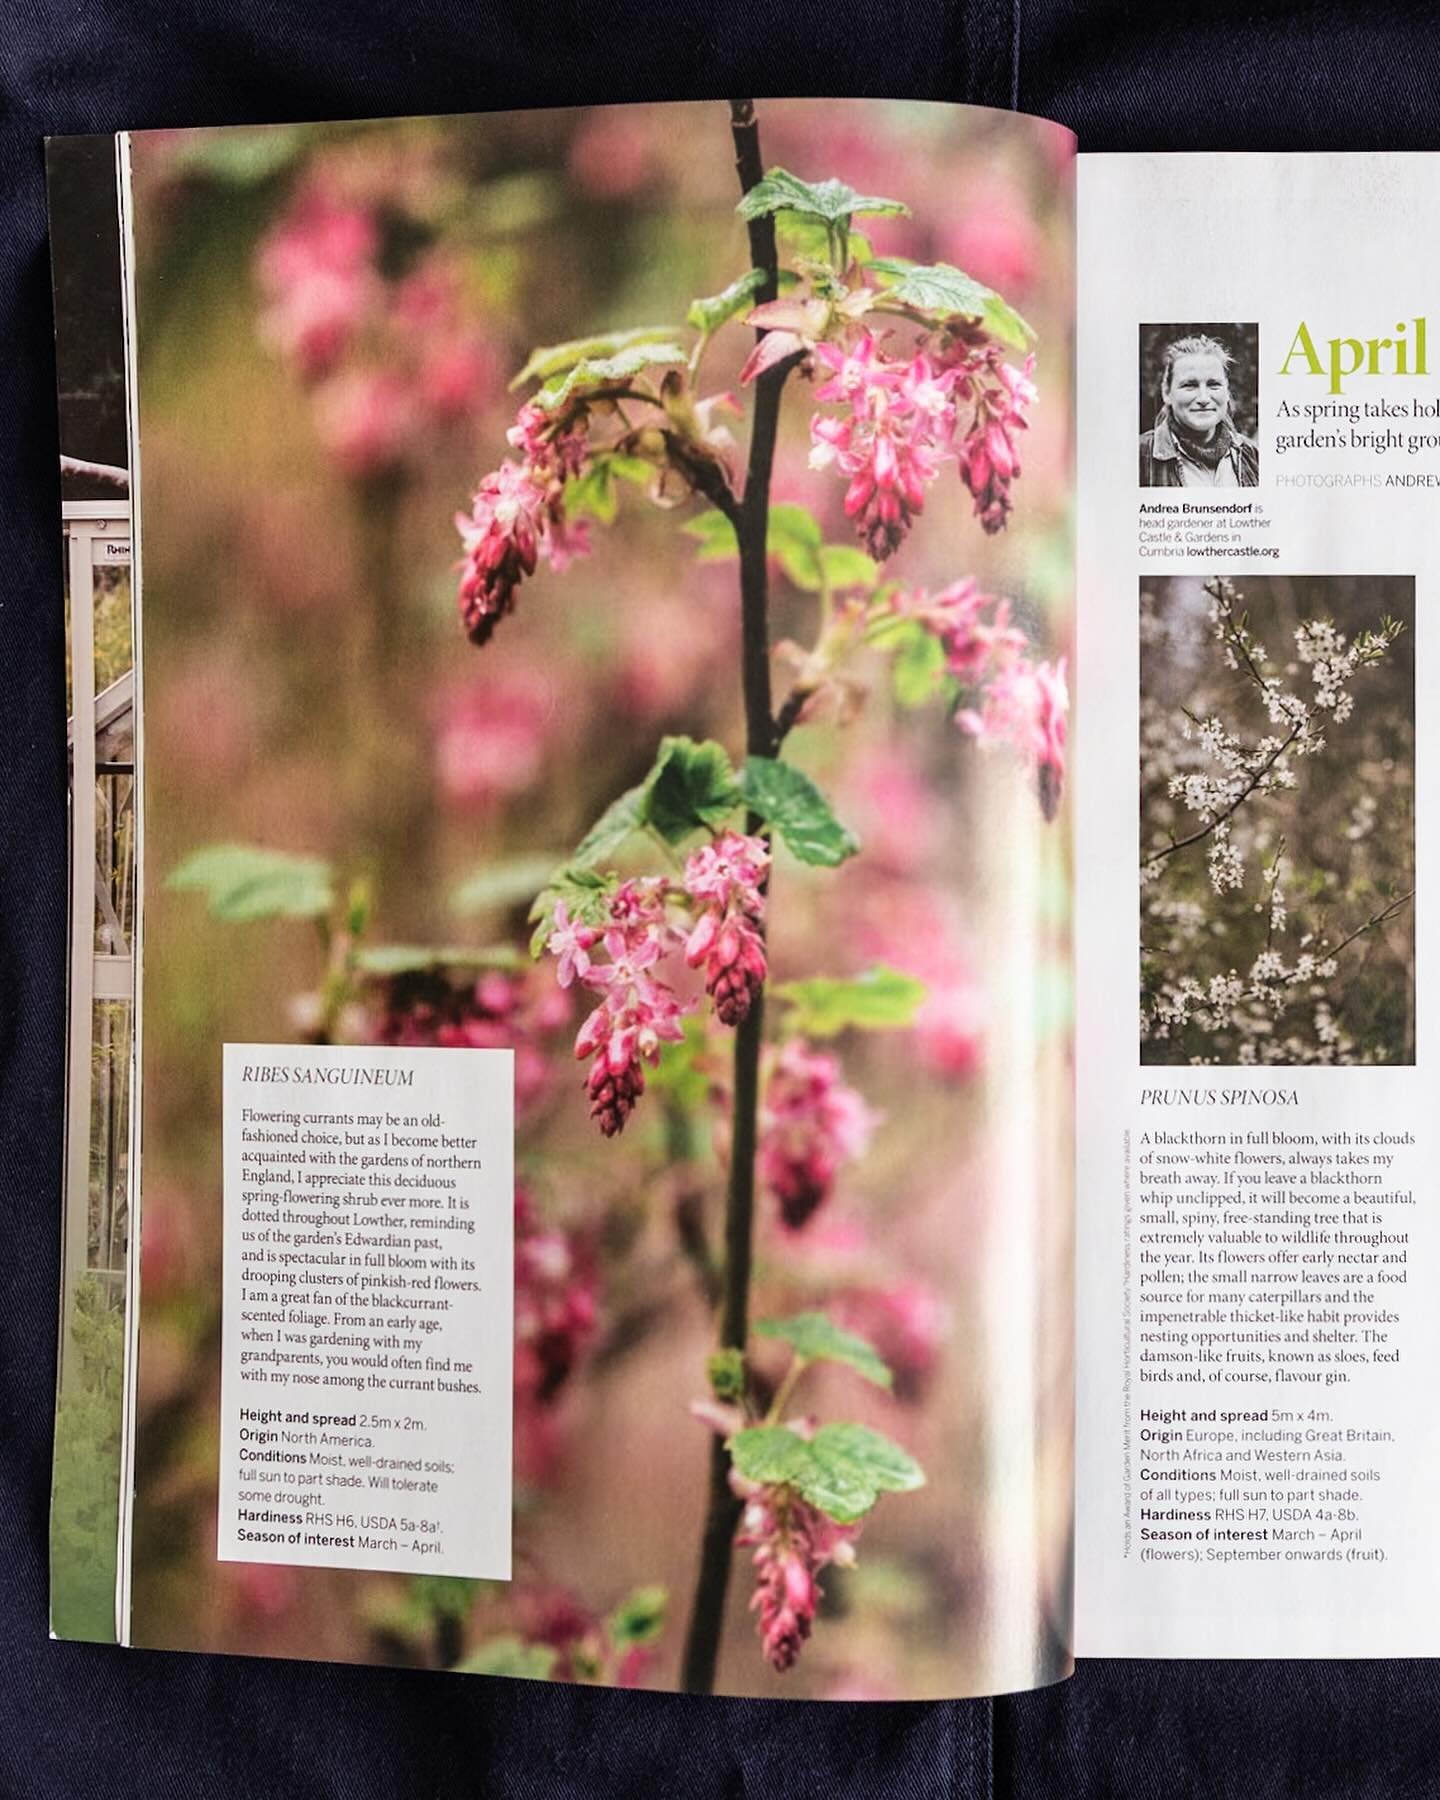 More seasonal plant picks from @andreabrunsendorf in the April issue of @gardens_illustrated